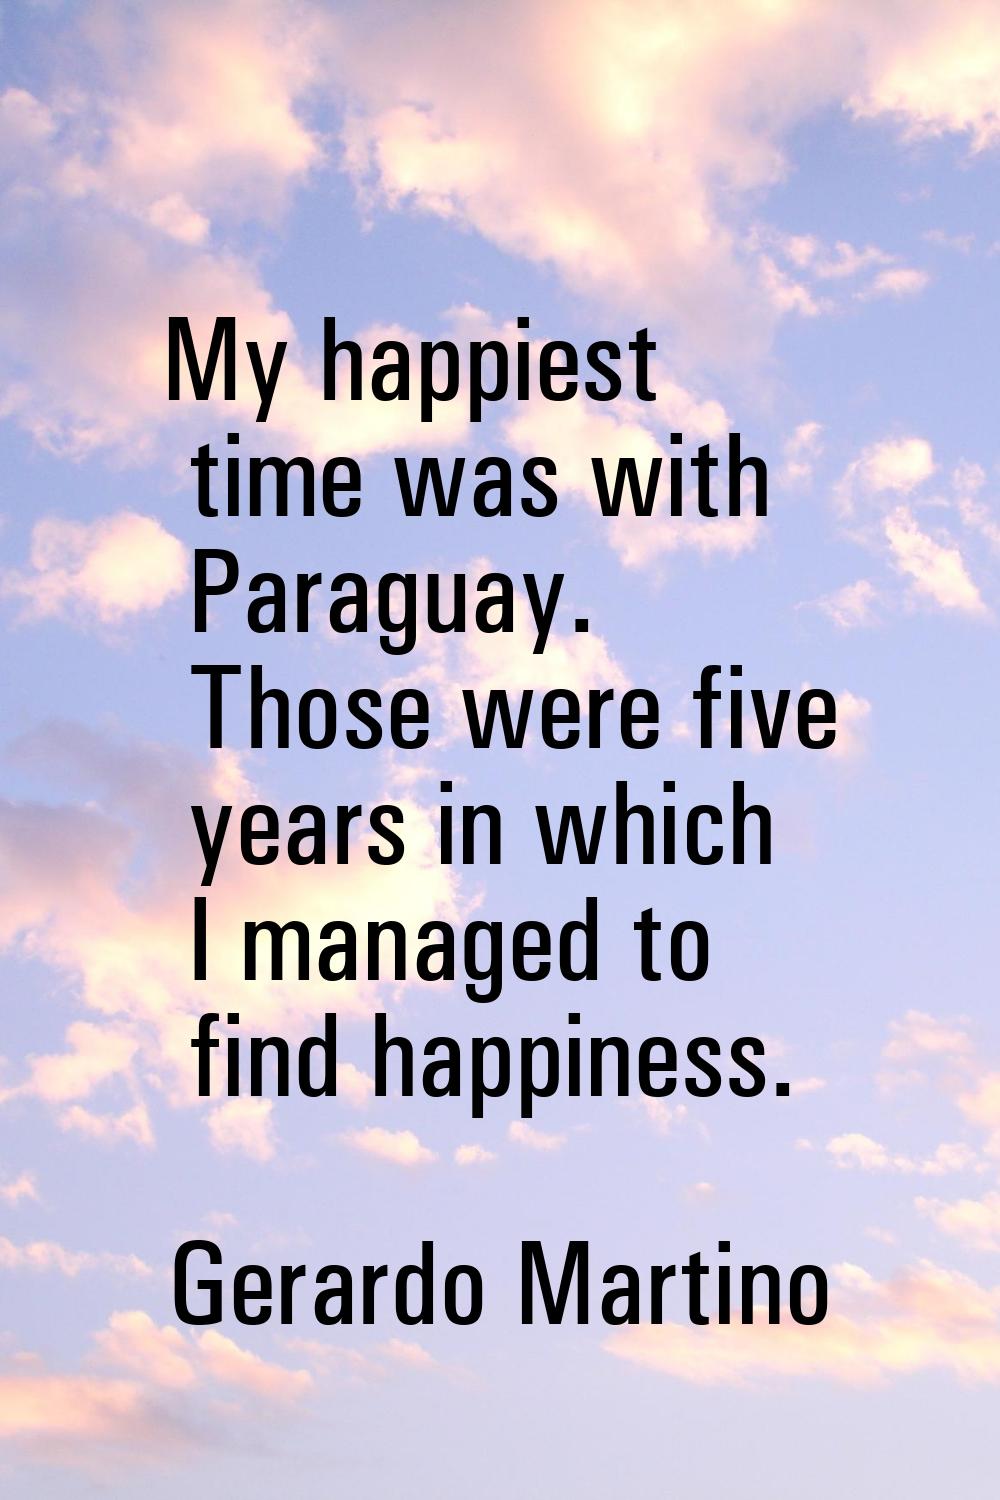 My happiest time was with Paraguay. Those were five years in which I managed to find happiness.